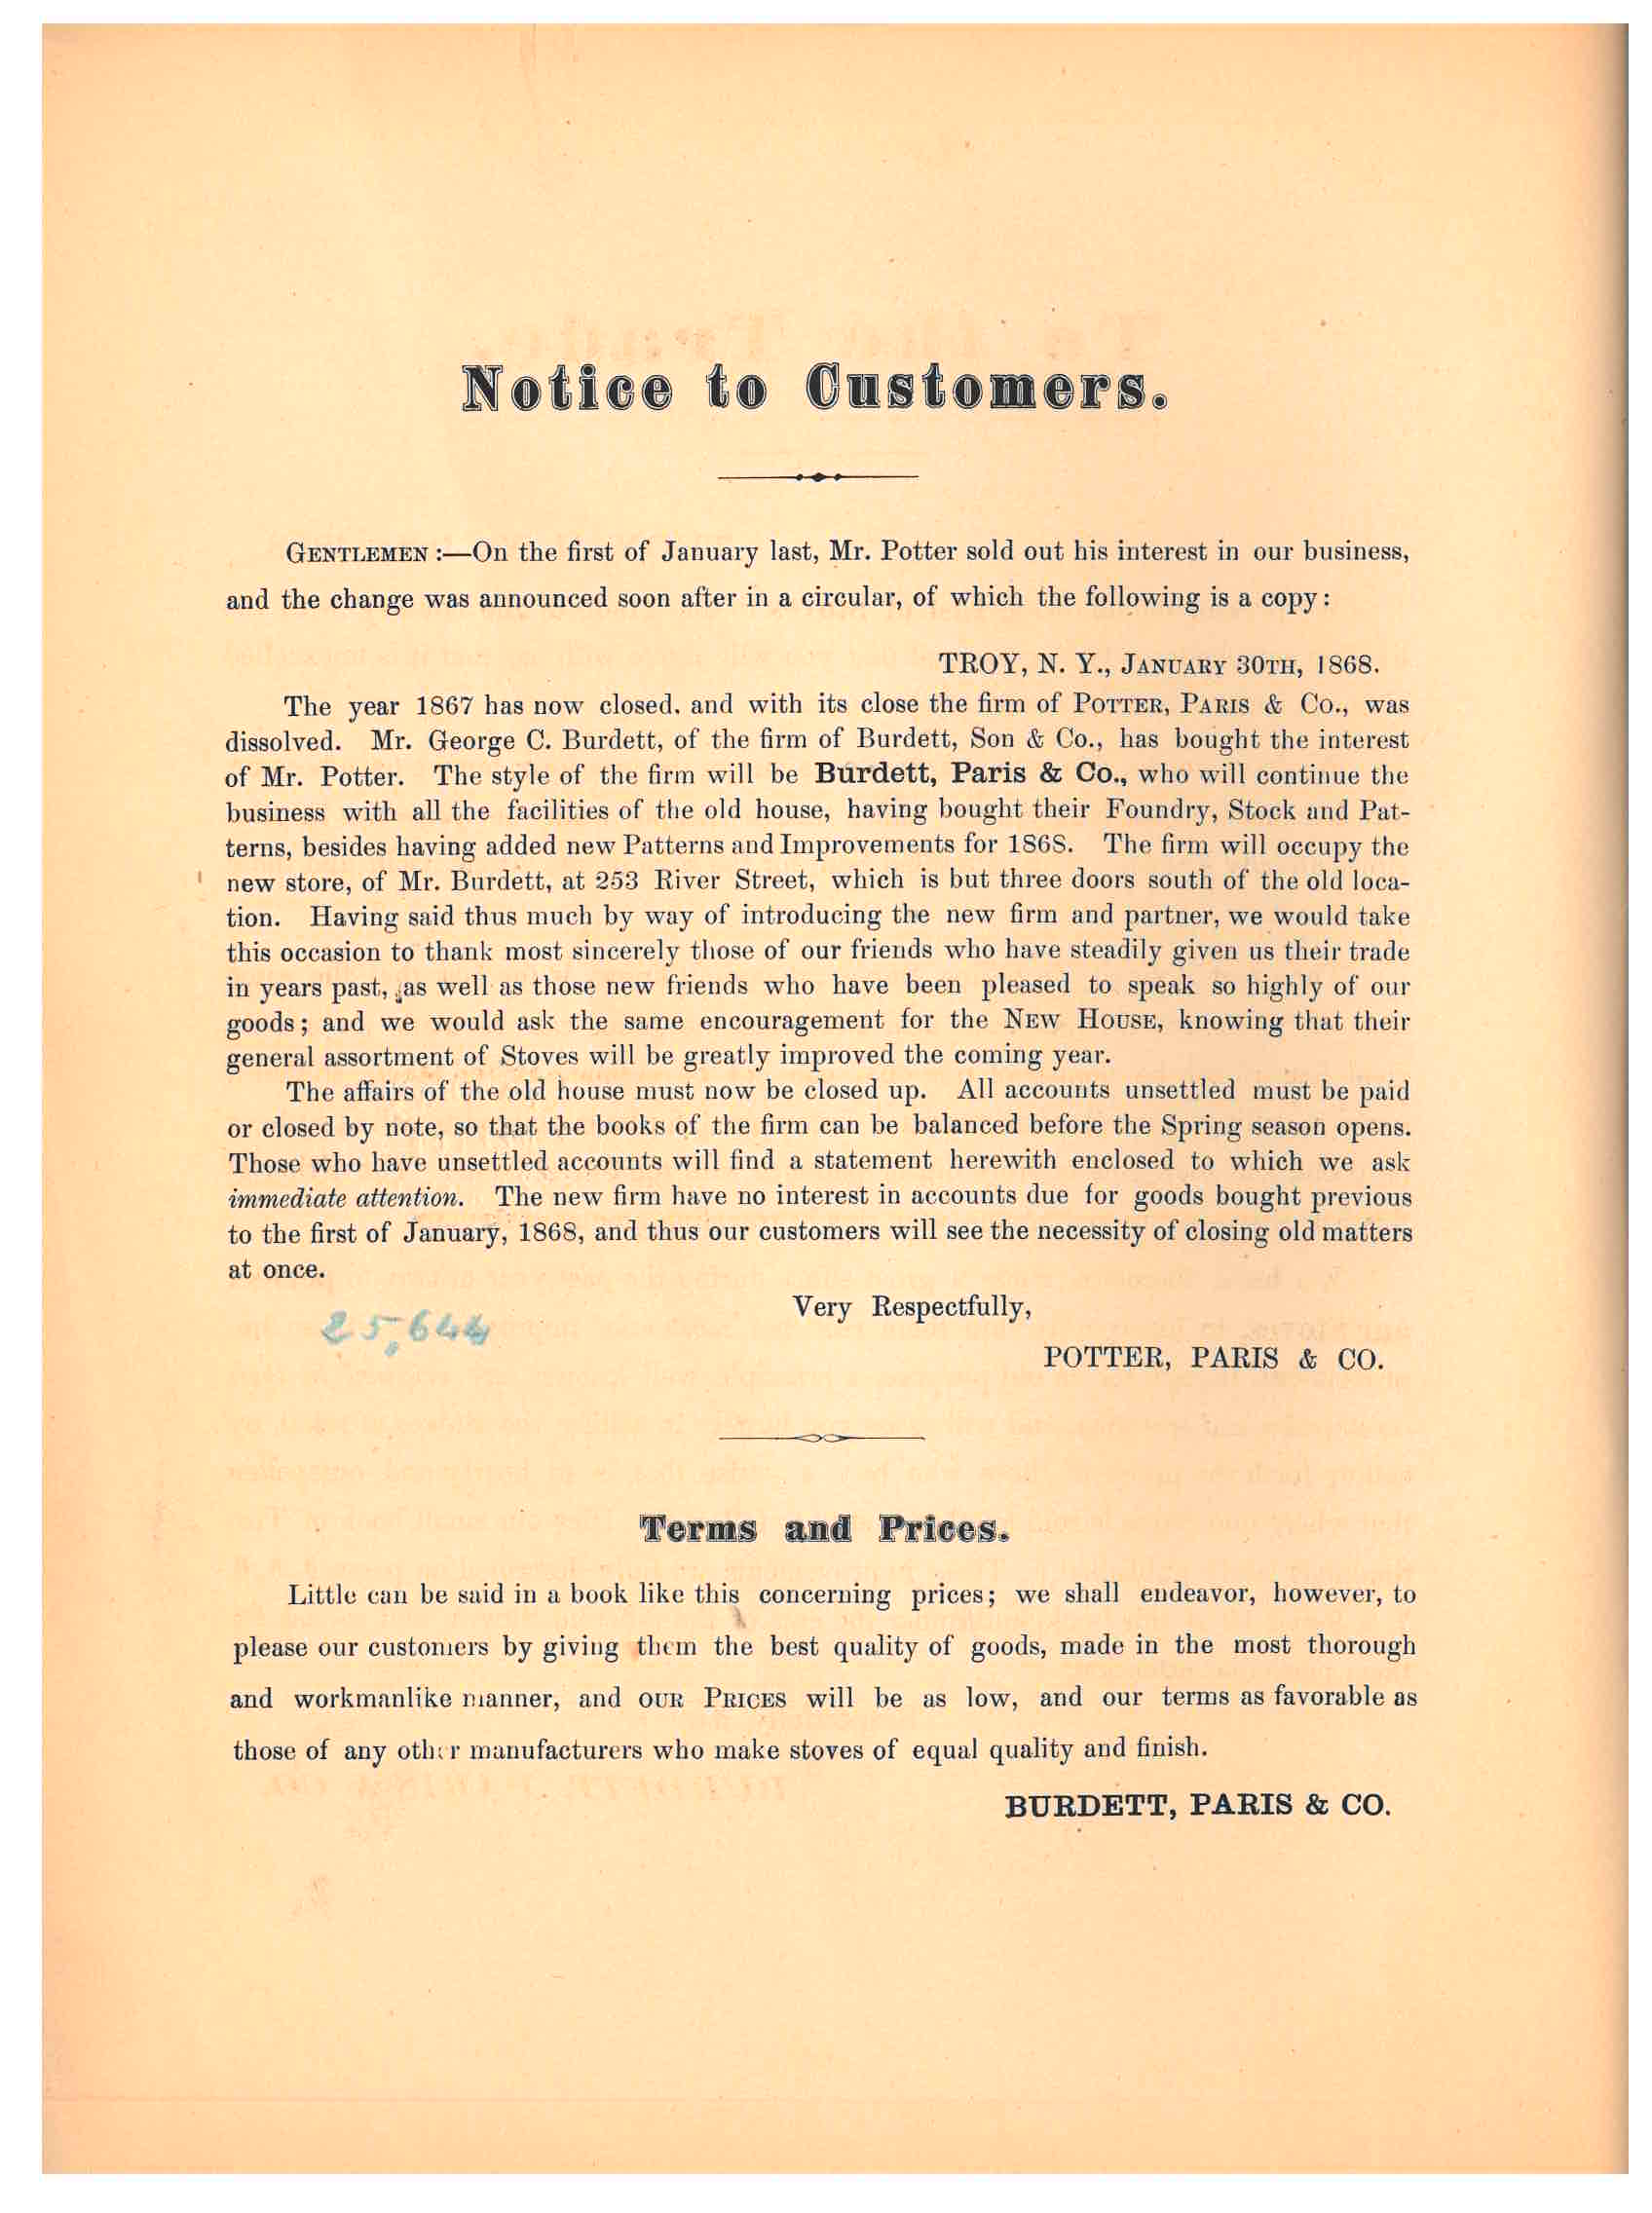 Notice to Customers with circular written by Potter, Paris & Co. and Terms and Prices written by Burdett, Paris & Co.